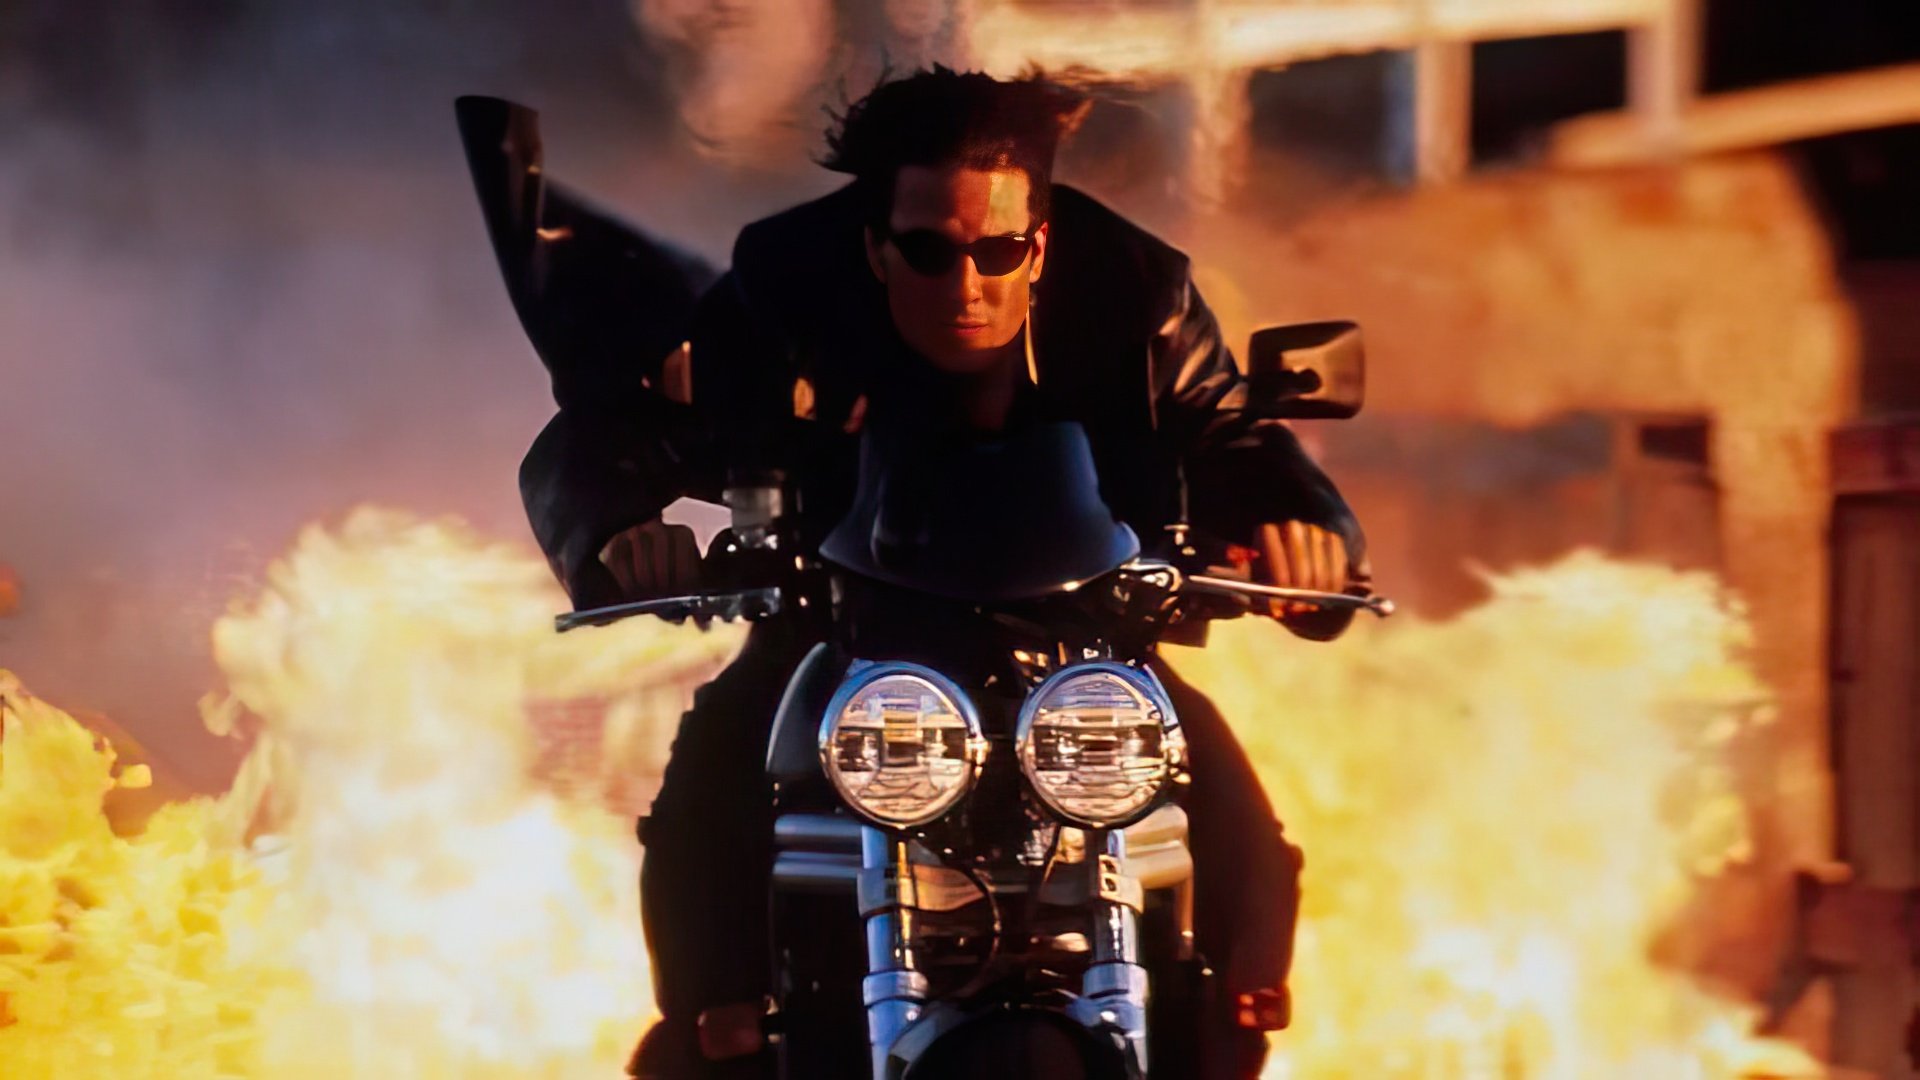 All the motorcycle stunts are performed by Tom Cruise himself